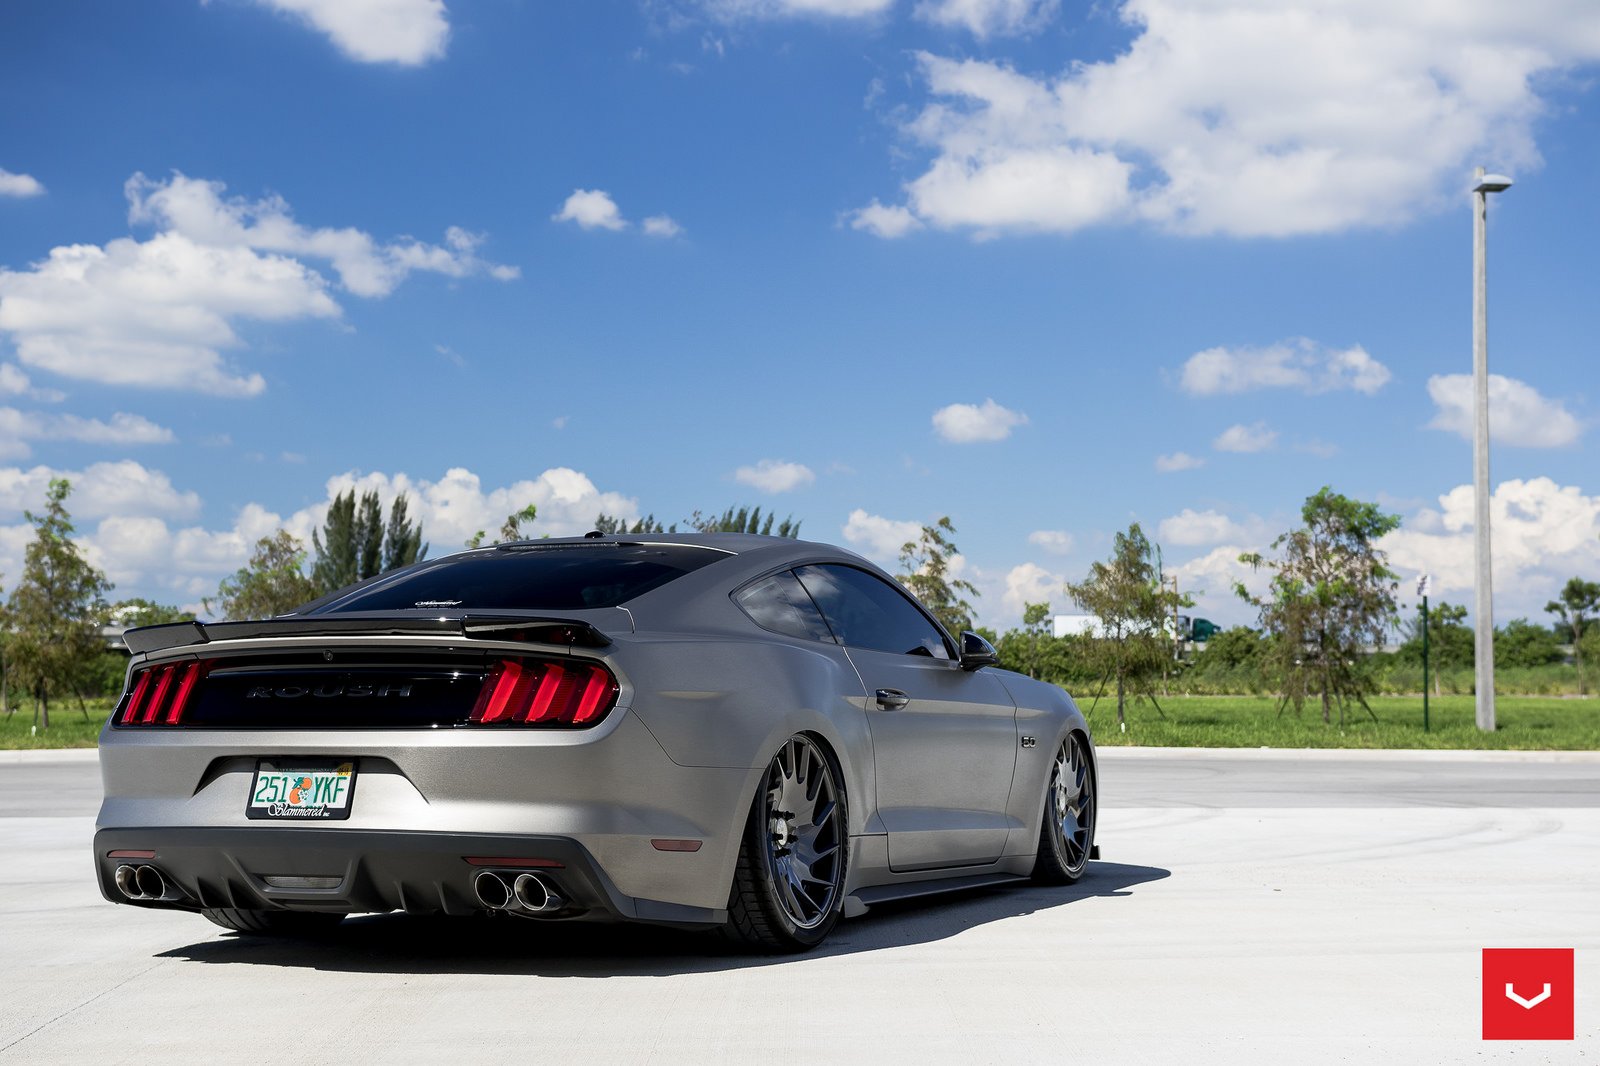 vossen, Wheels, 2015, Roush, Performance, Ford, Mustang, Coupe, Cars, Modified Wallpaper